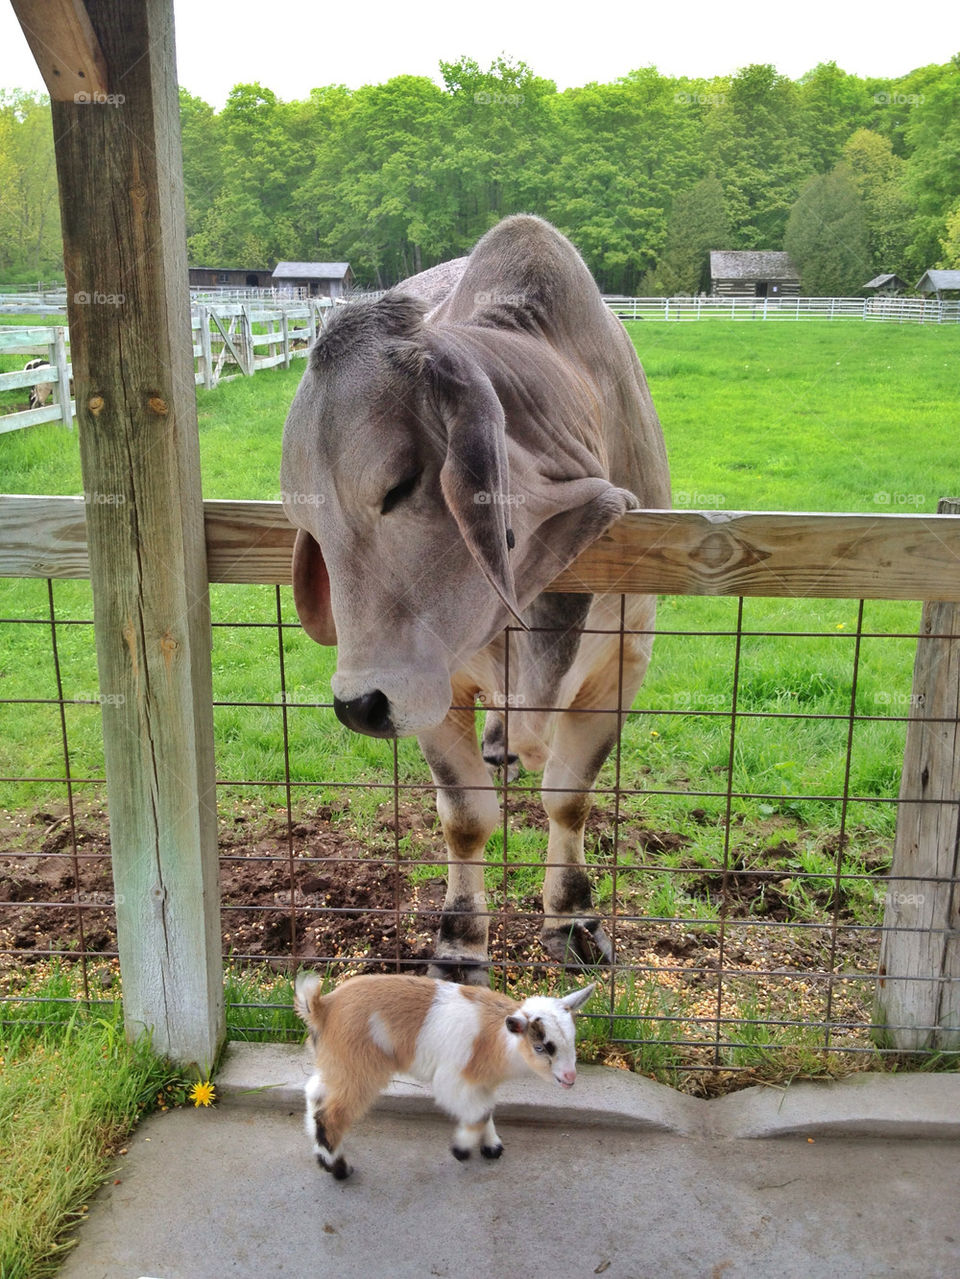 Cow and kid goat at farm